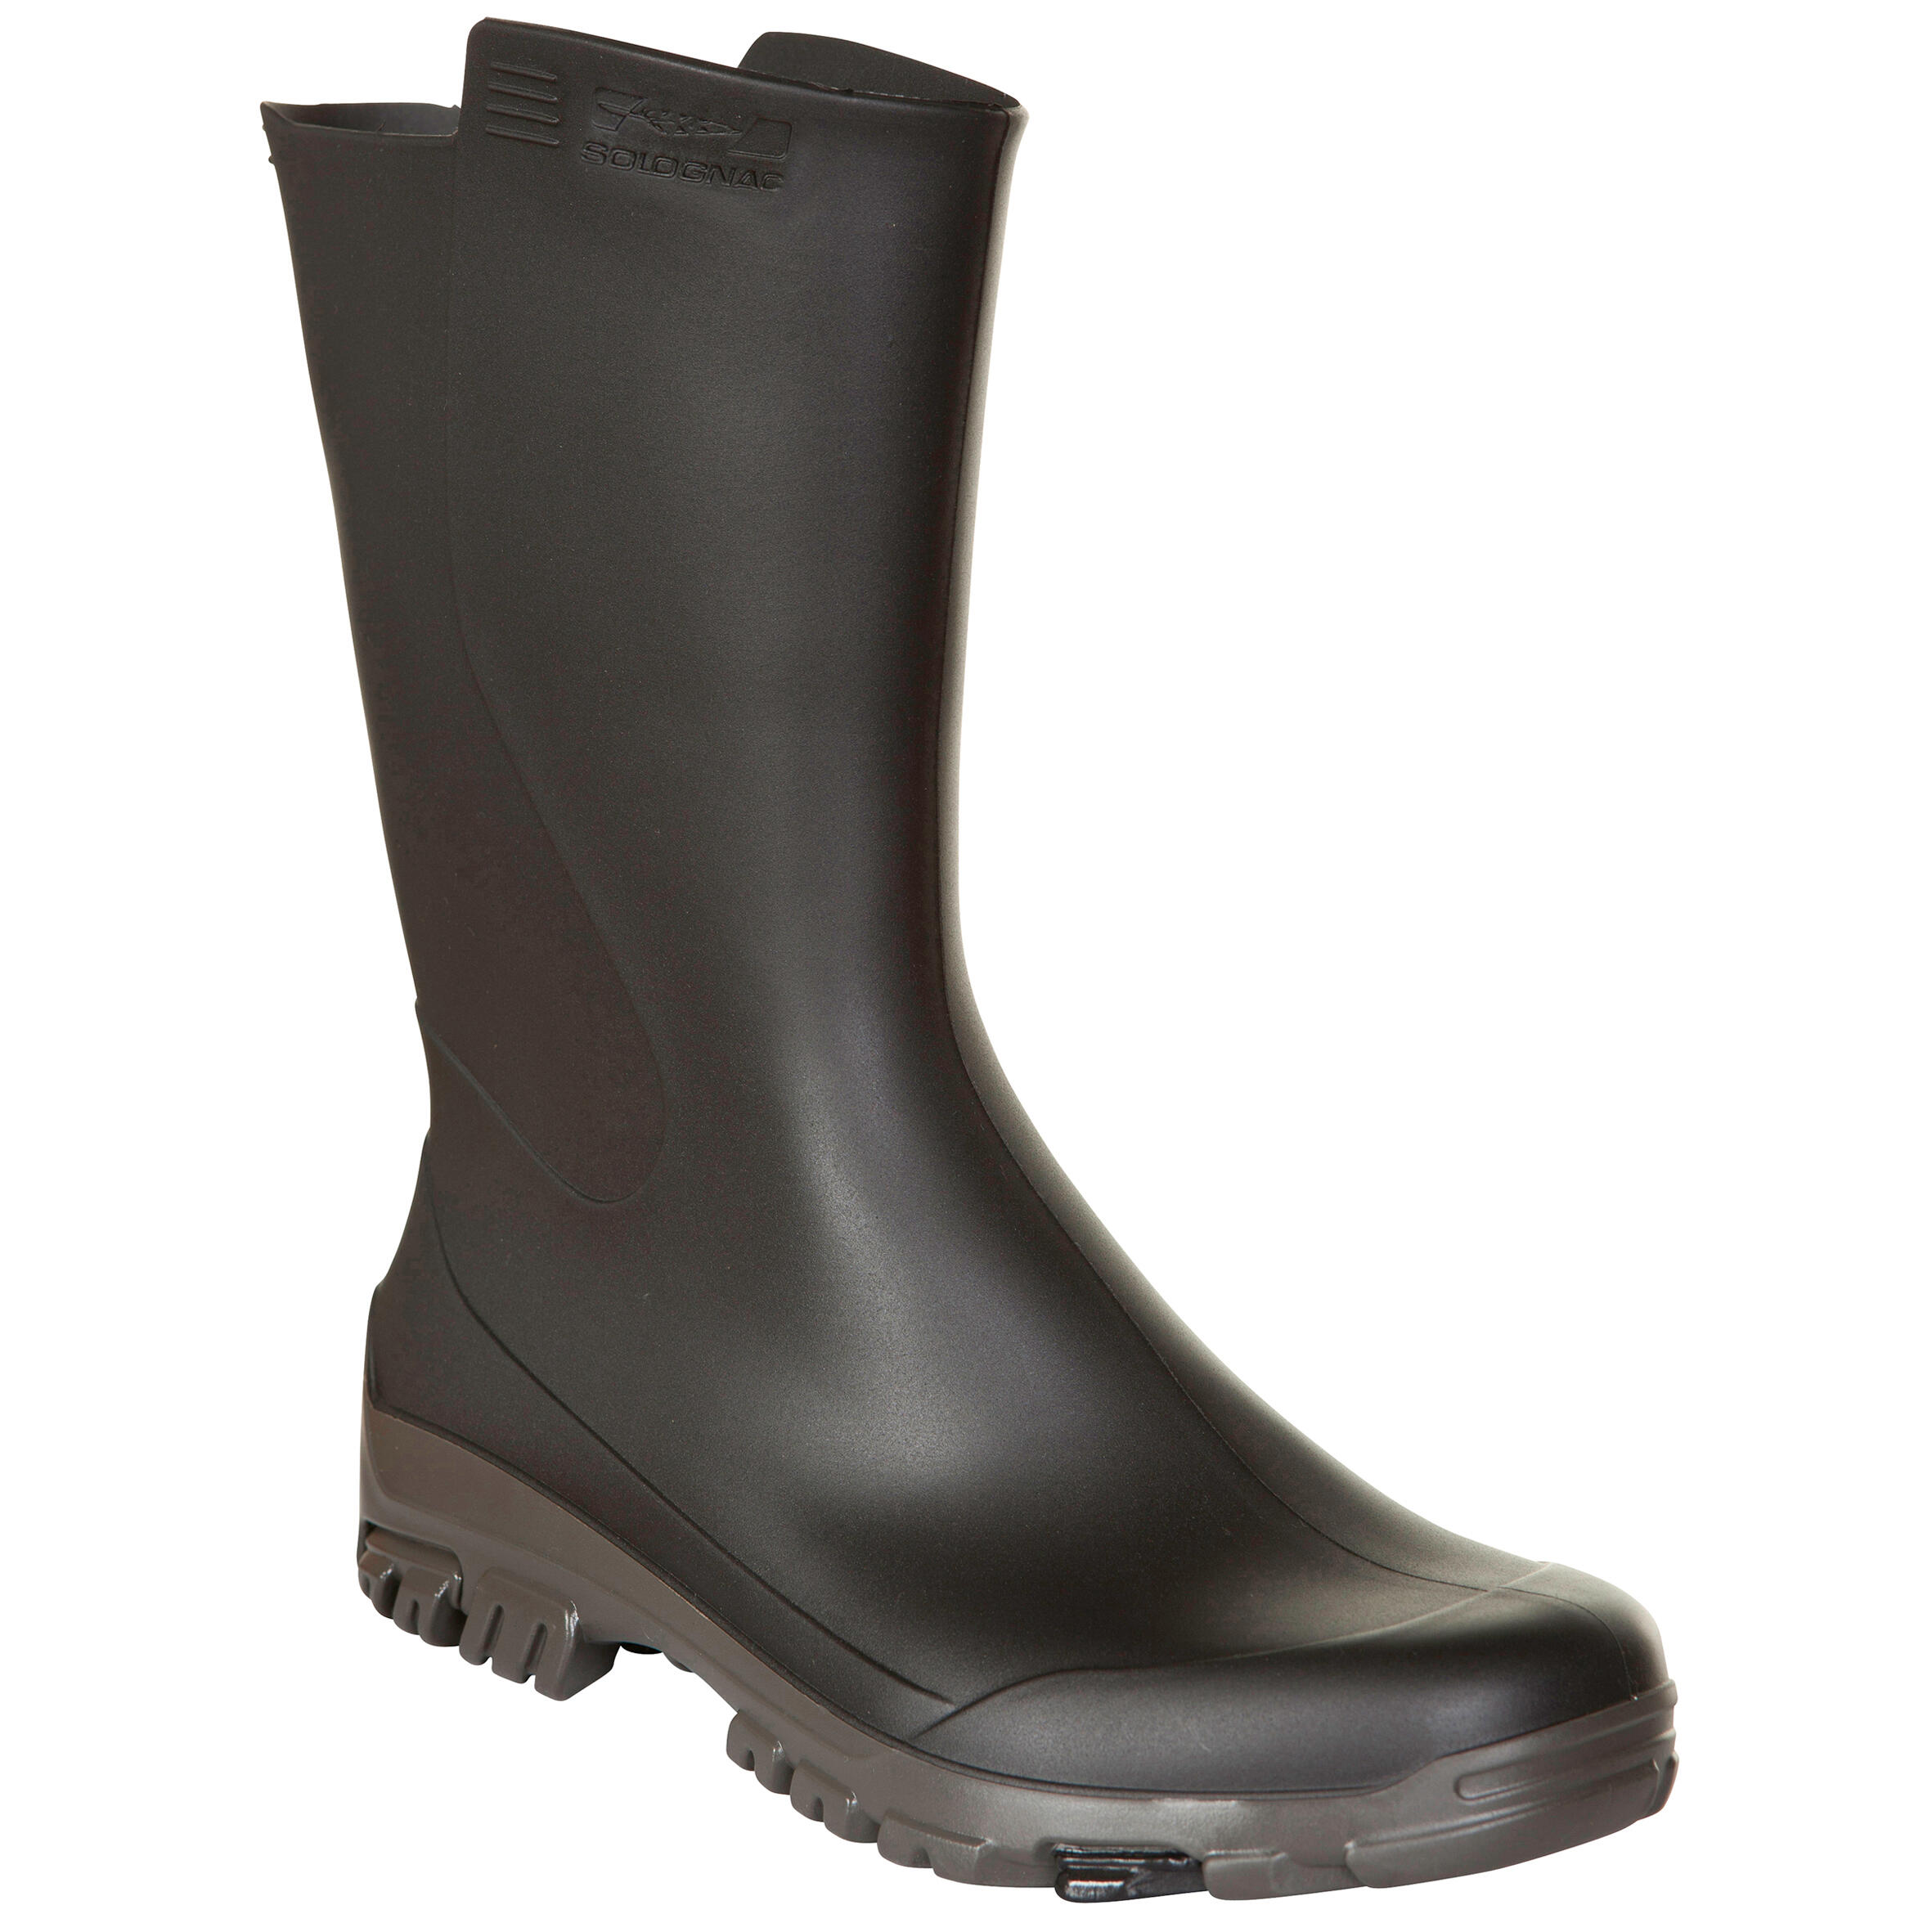 Buy Gumboots for Monsoon Online at 